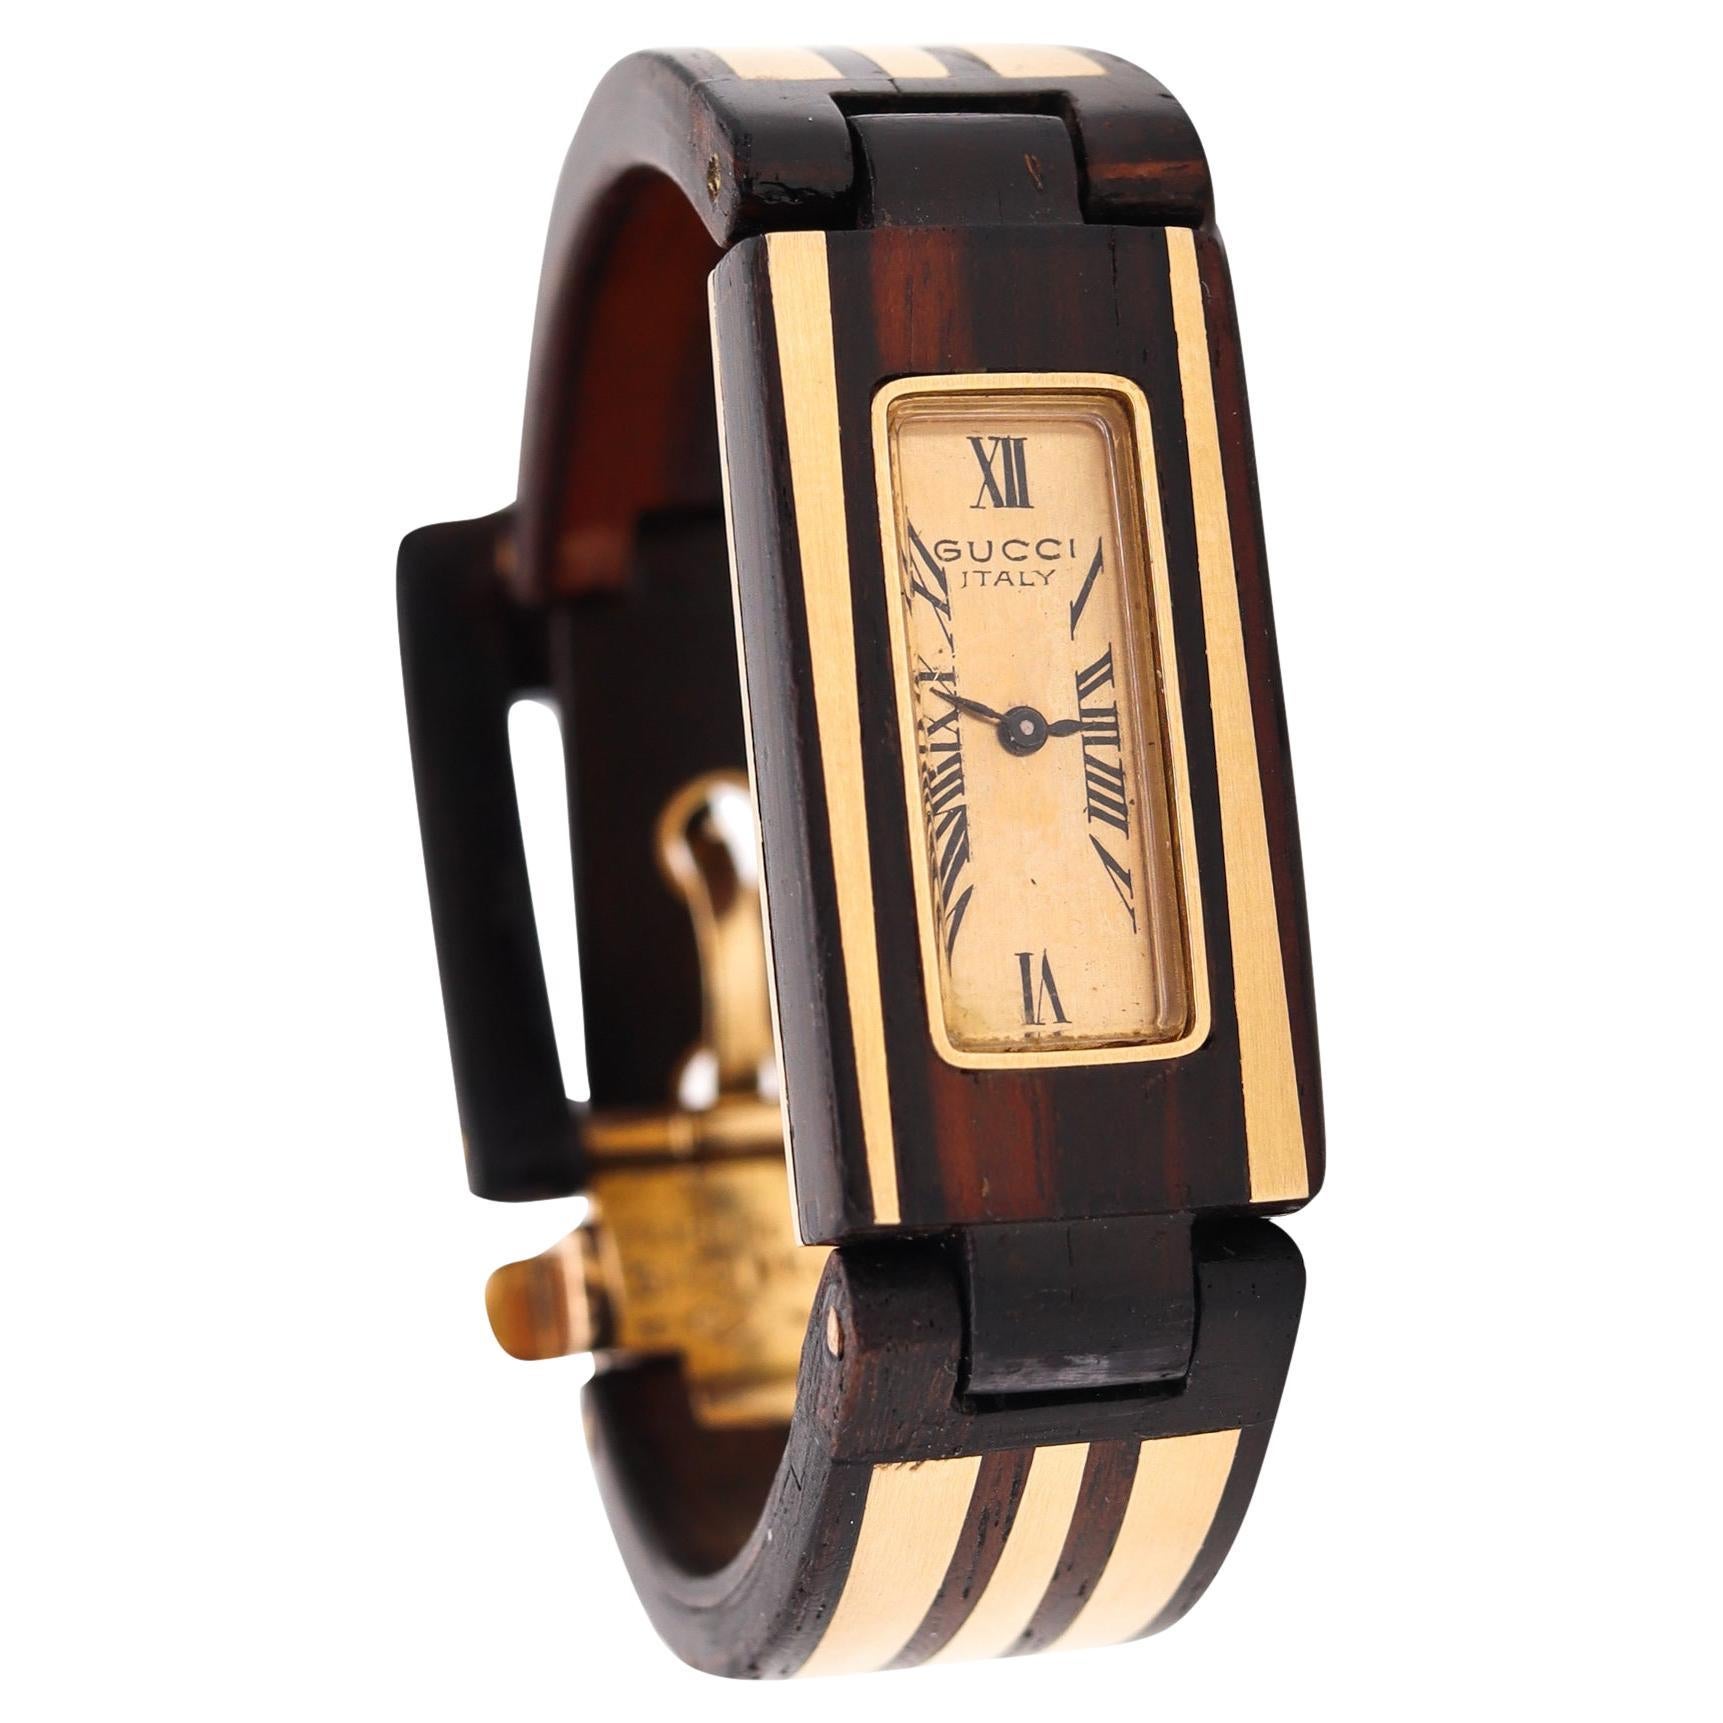 Gucci France 1968 Rare Buckle Bracelet Watch in Macassar Wood Inlaid of 18K Gold For Sale